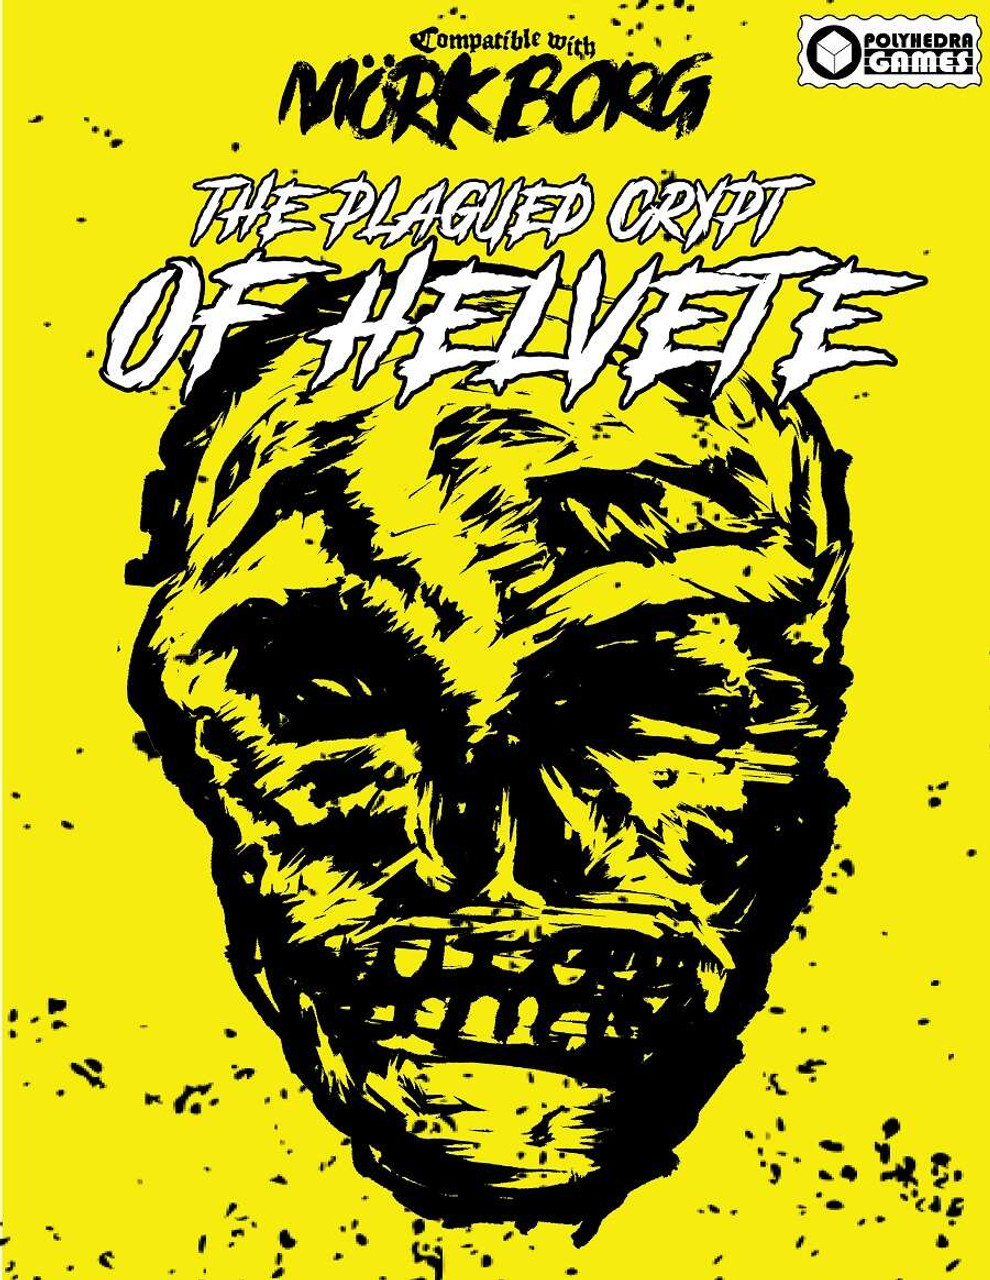 The Plagued Crypt of Helvete (MORK BORG compatable)